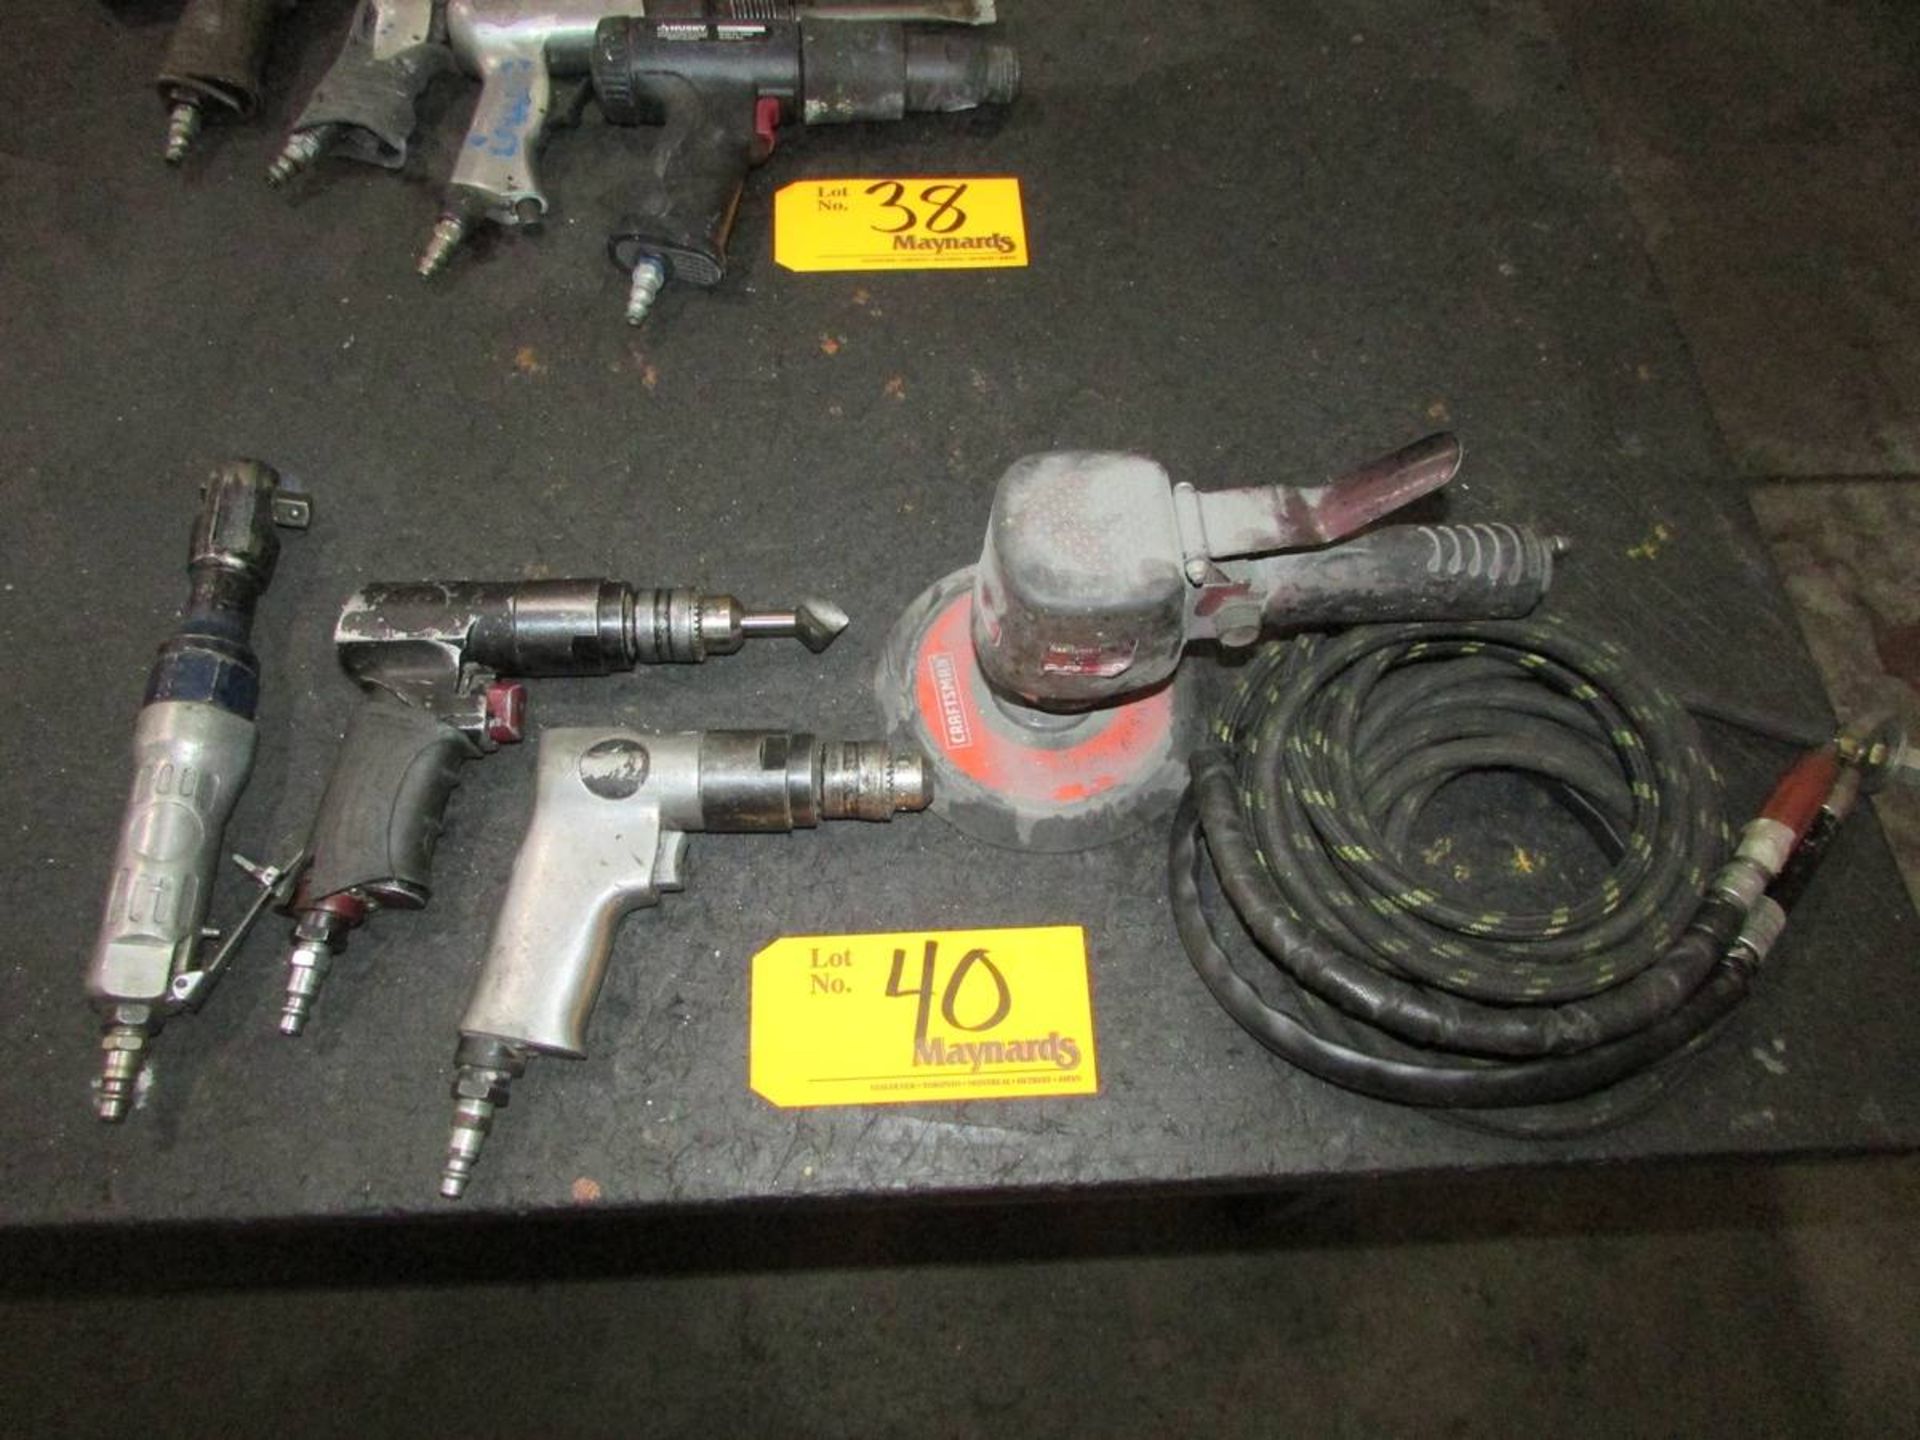 Assorted Pneumatic Power Tools